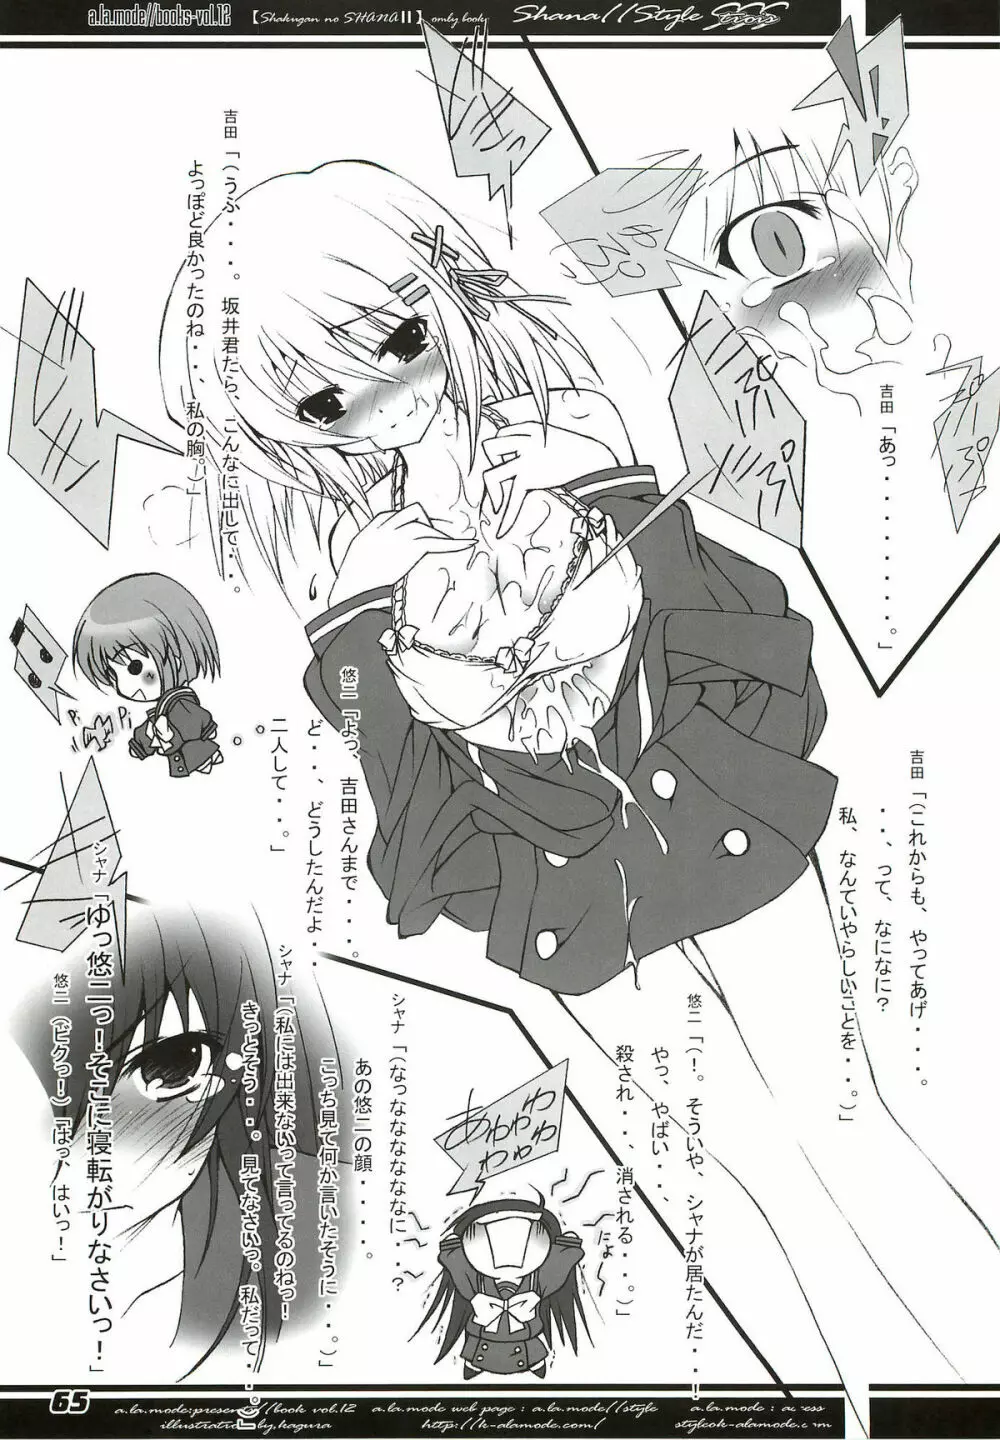 La Collection -Shana／／Style- Page.65